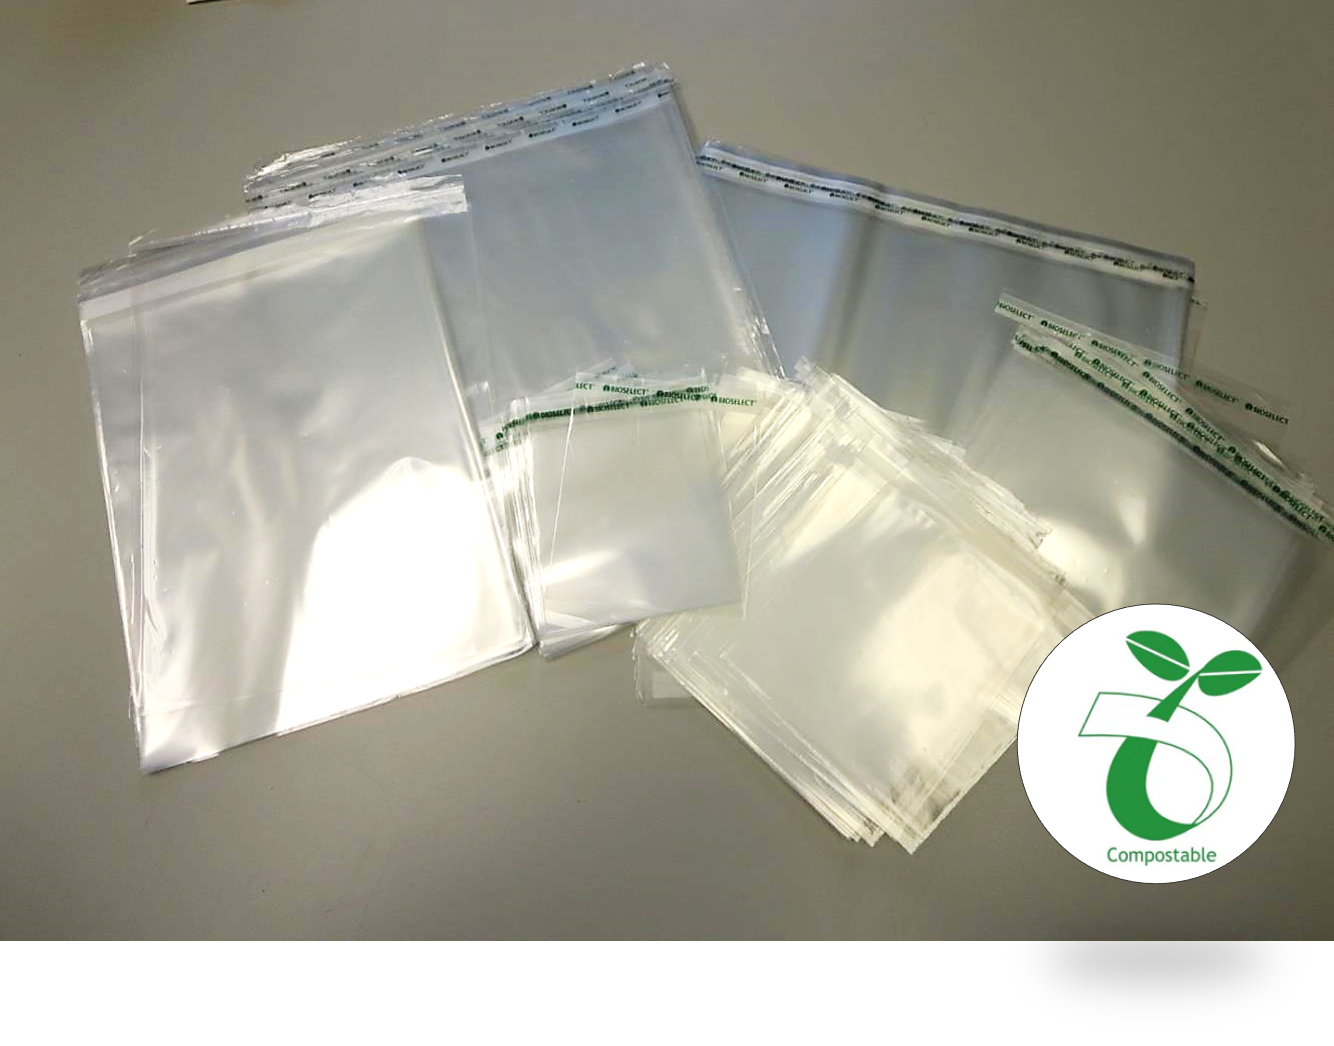 These 5 1/2-in x 5 1/2-in 100% compostable 1.2-mil clear Ingeo™ corn-based PLA food grade bags feature a 1″ lip and tape resealable closure. Pefect for wrapping sandwiches, desserts, cookies, snacks or packaging cutlery or napkins for take out. 